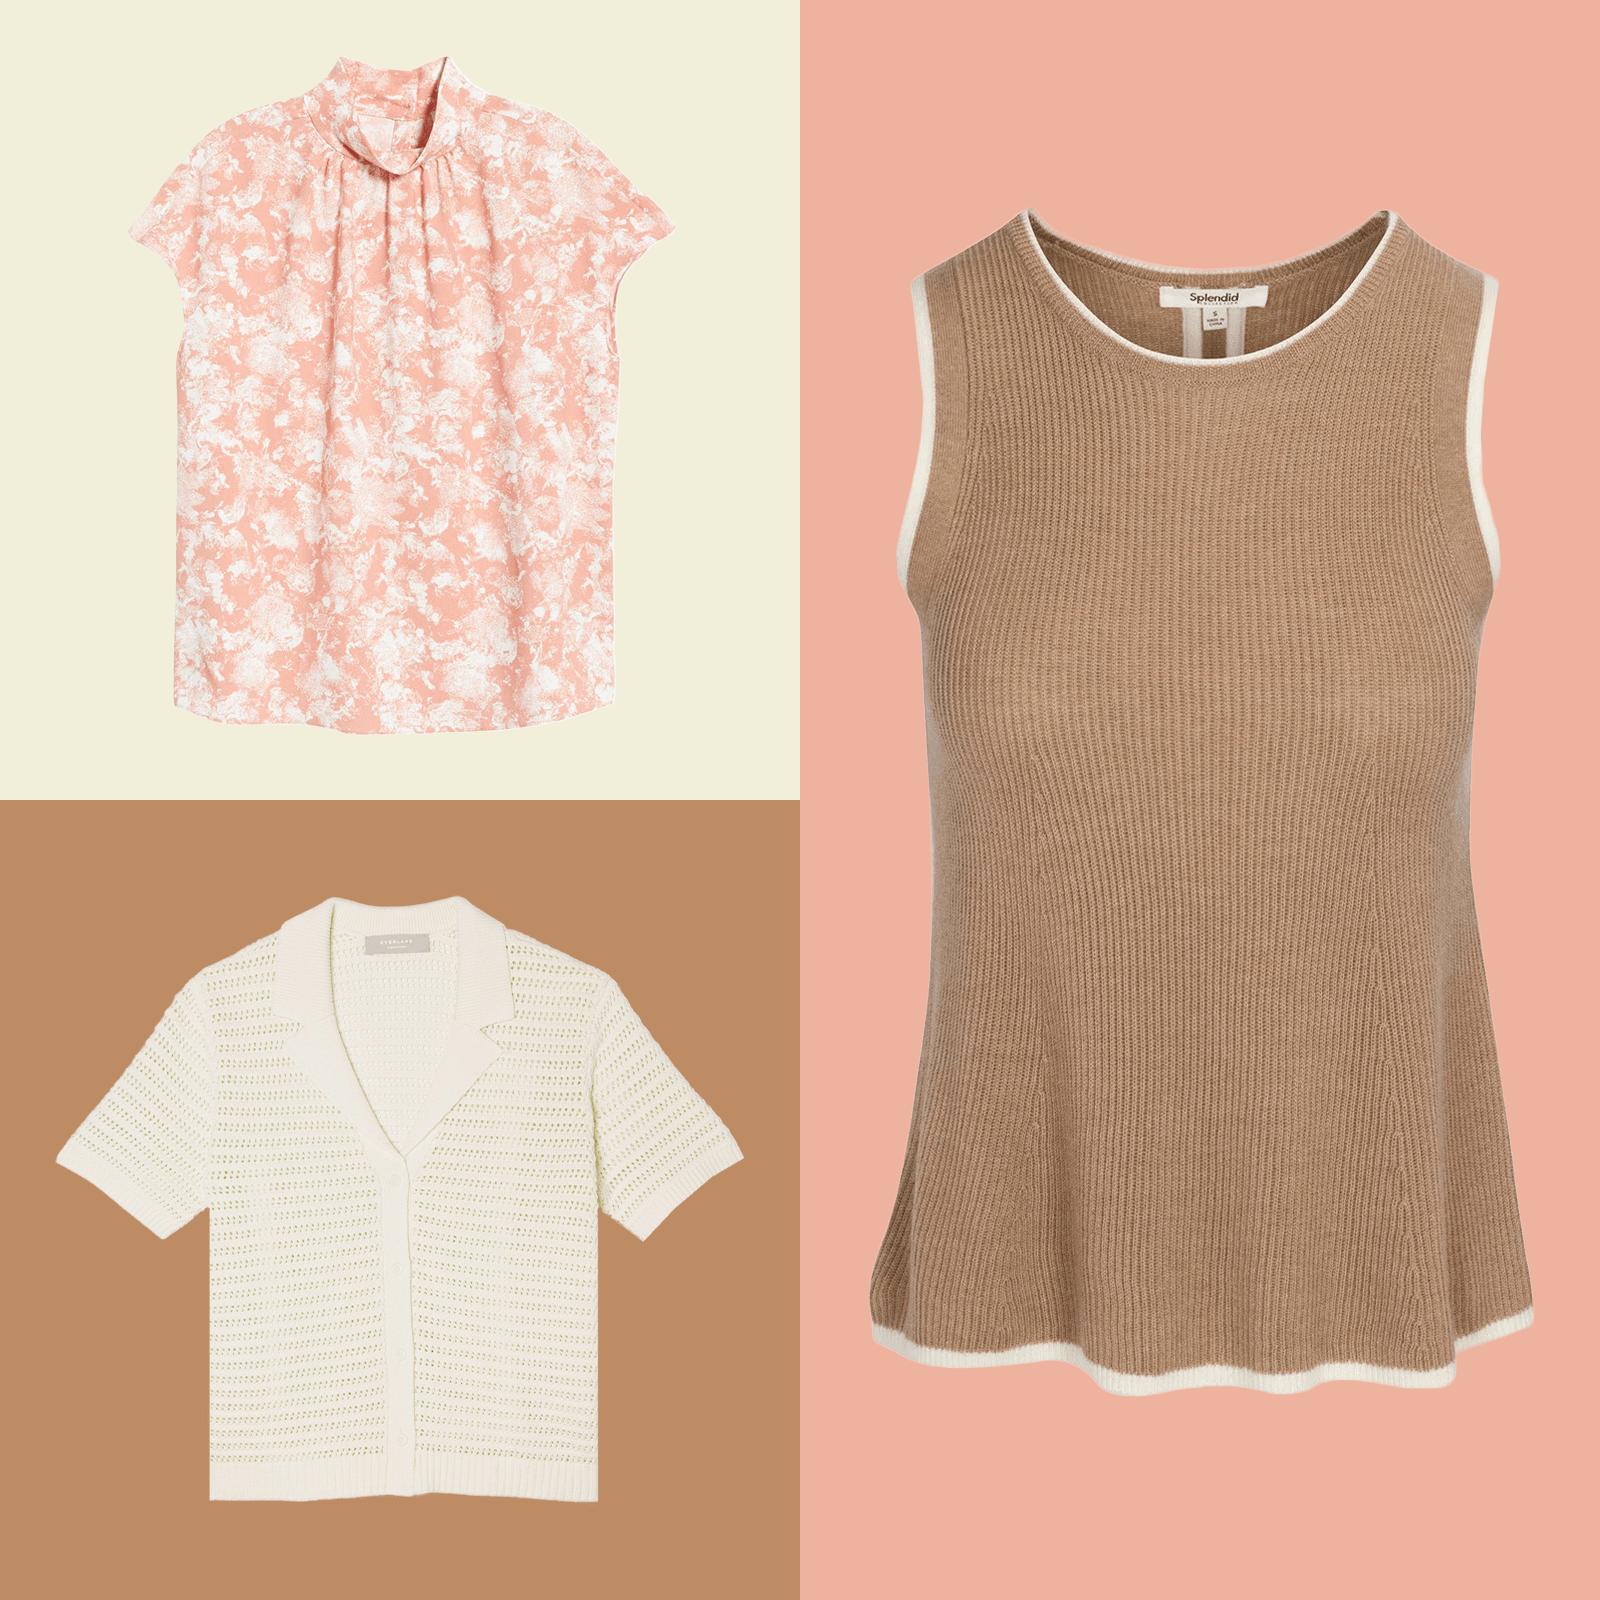 Discover the Hottest Trends: Unveiling 5 New Shirt Styles on